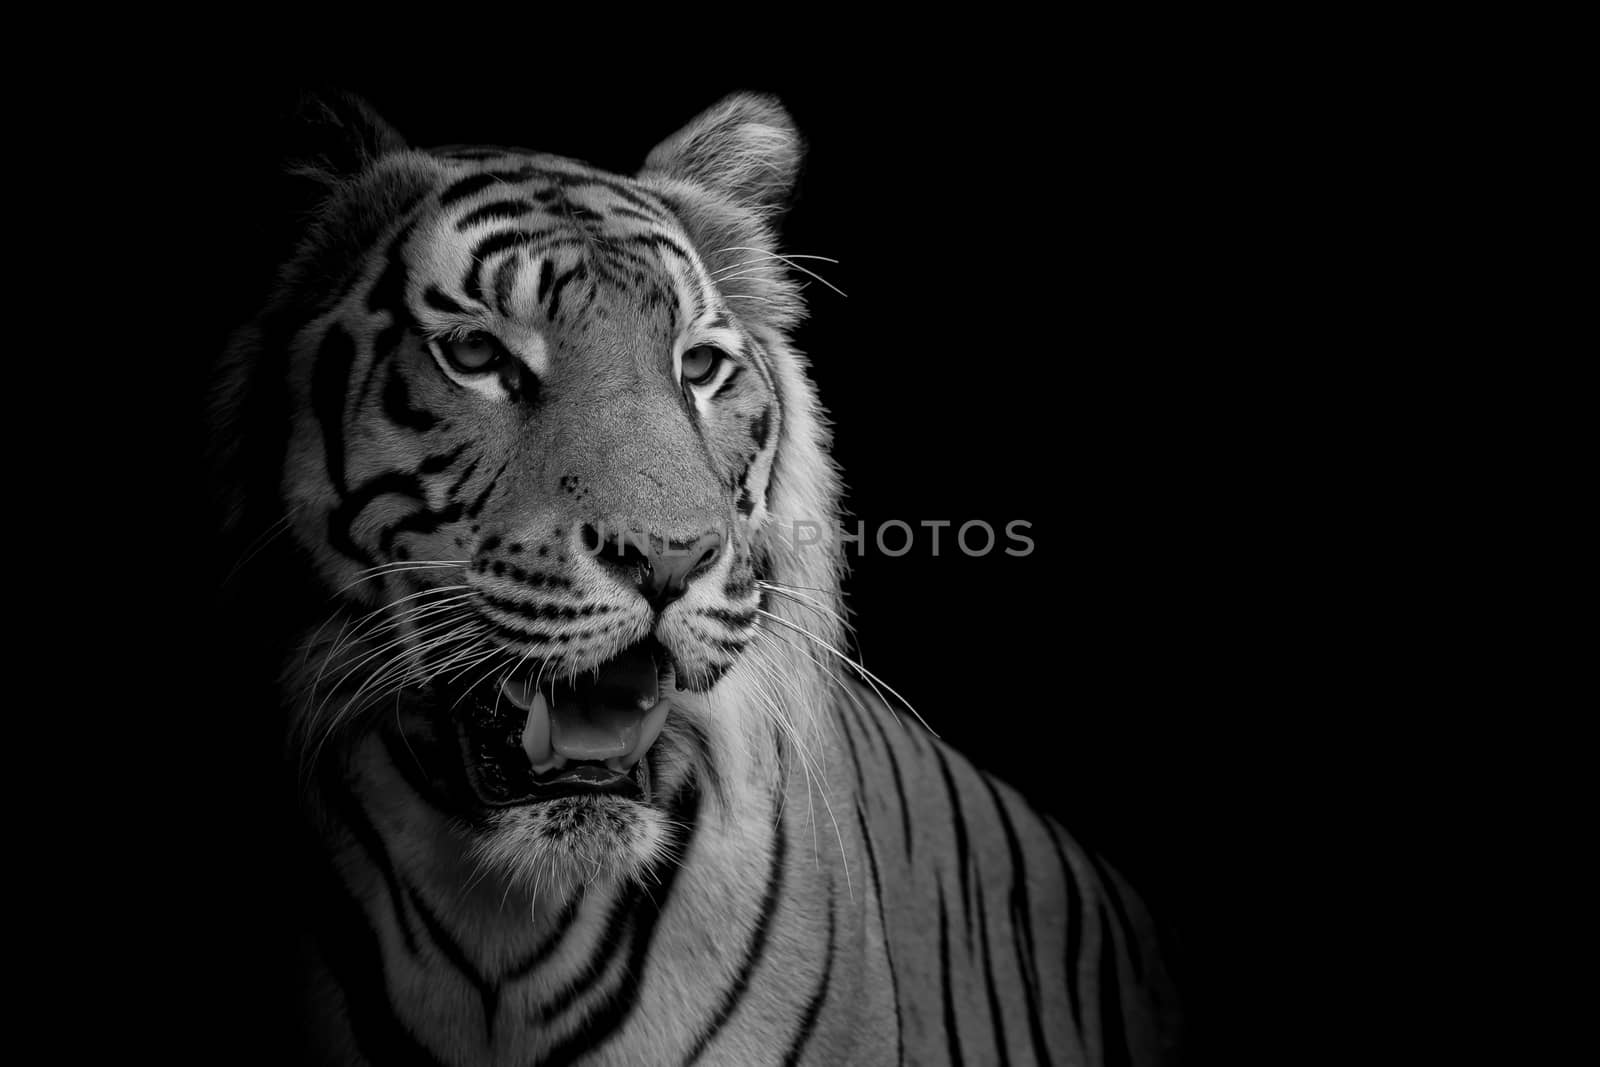 close up face tiger isolated on black background by art9858